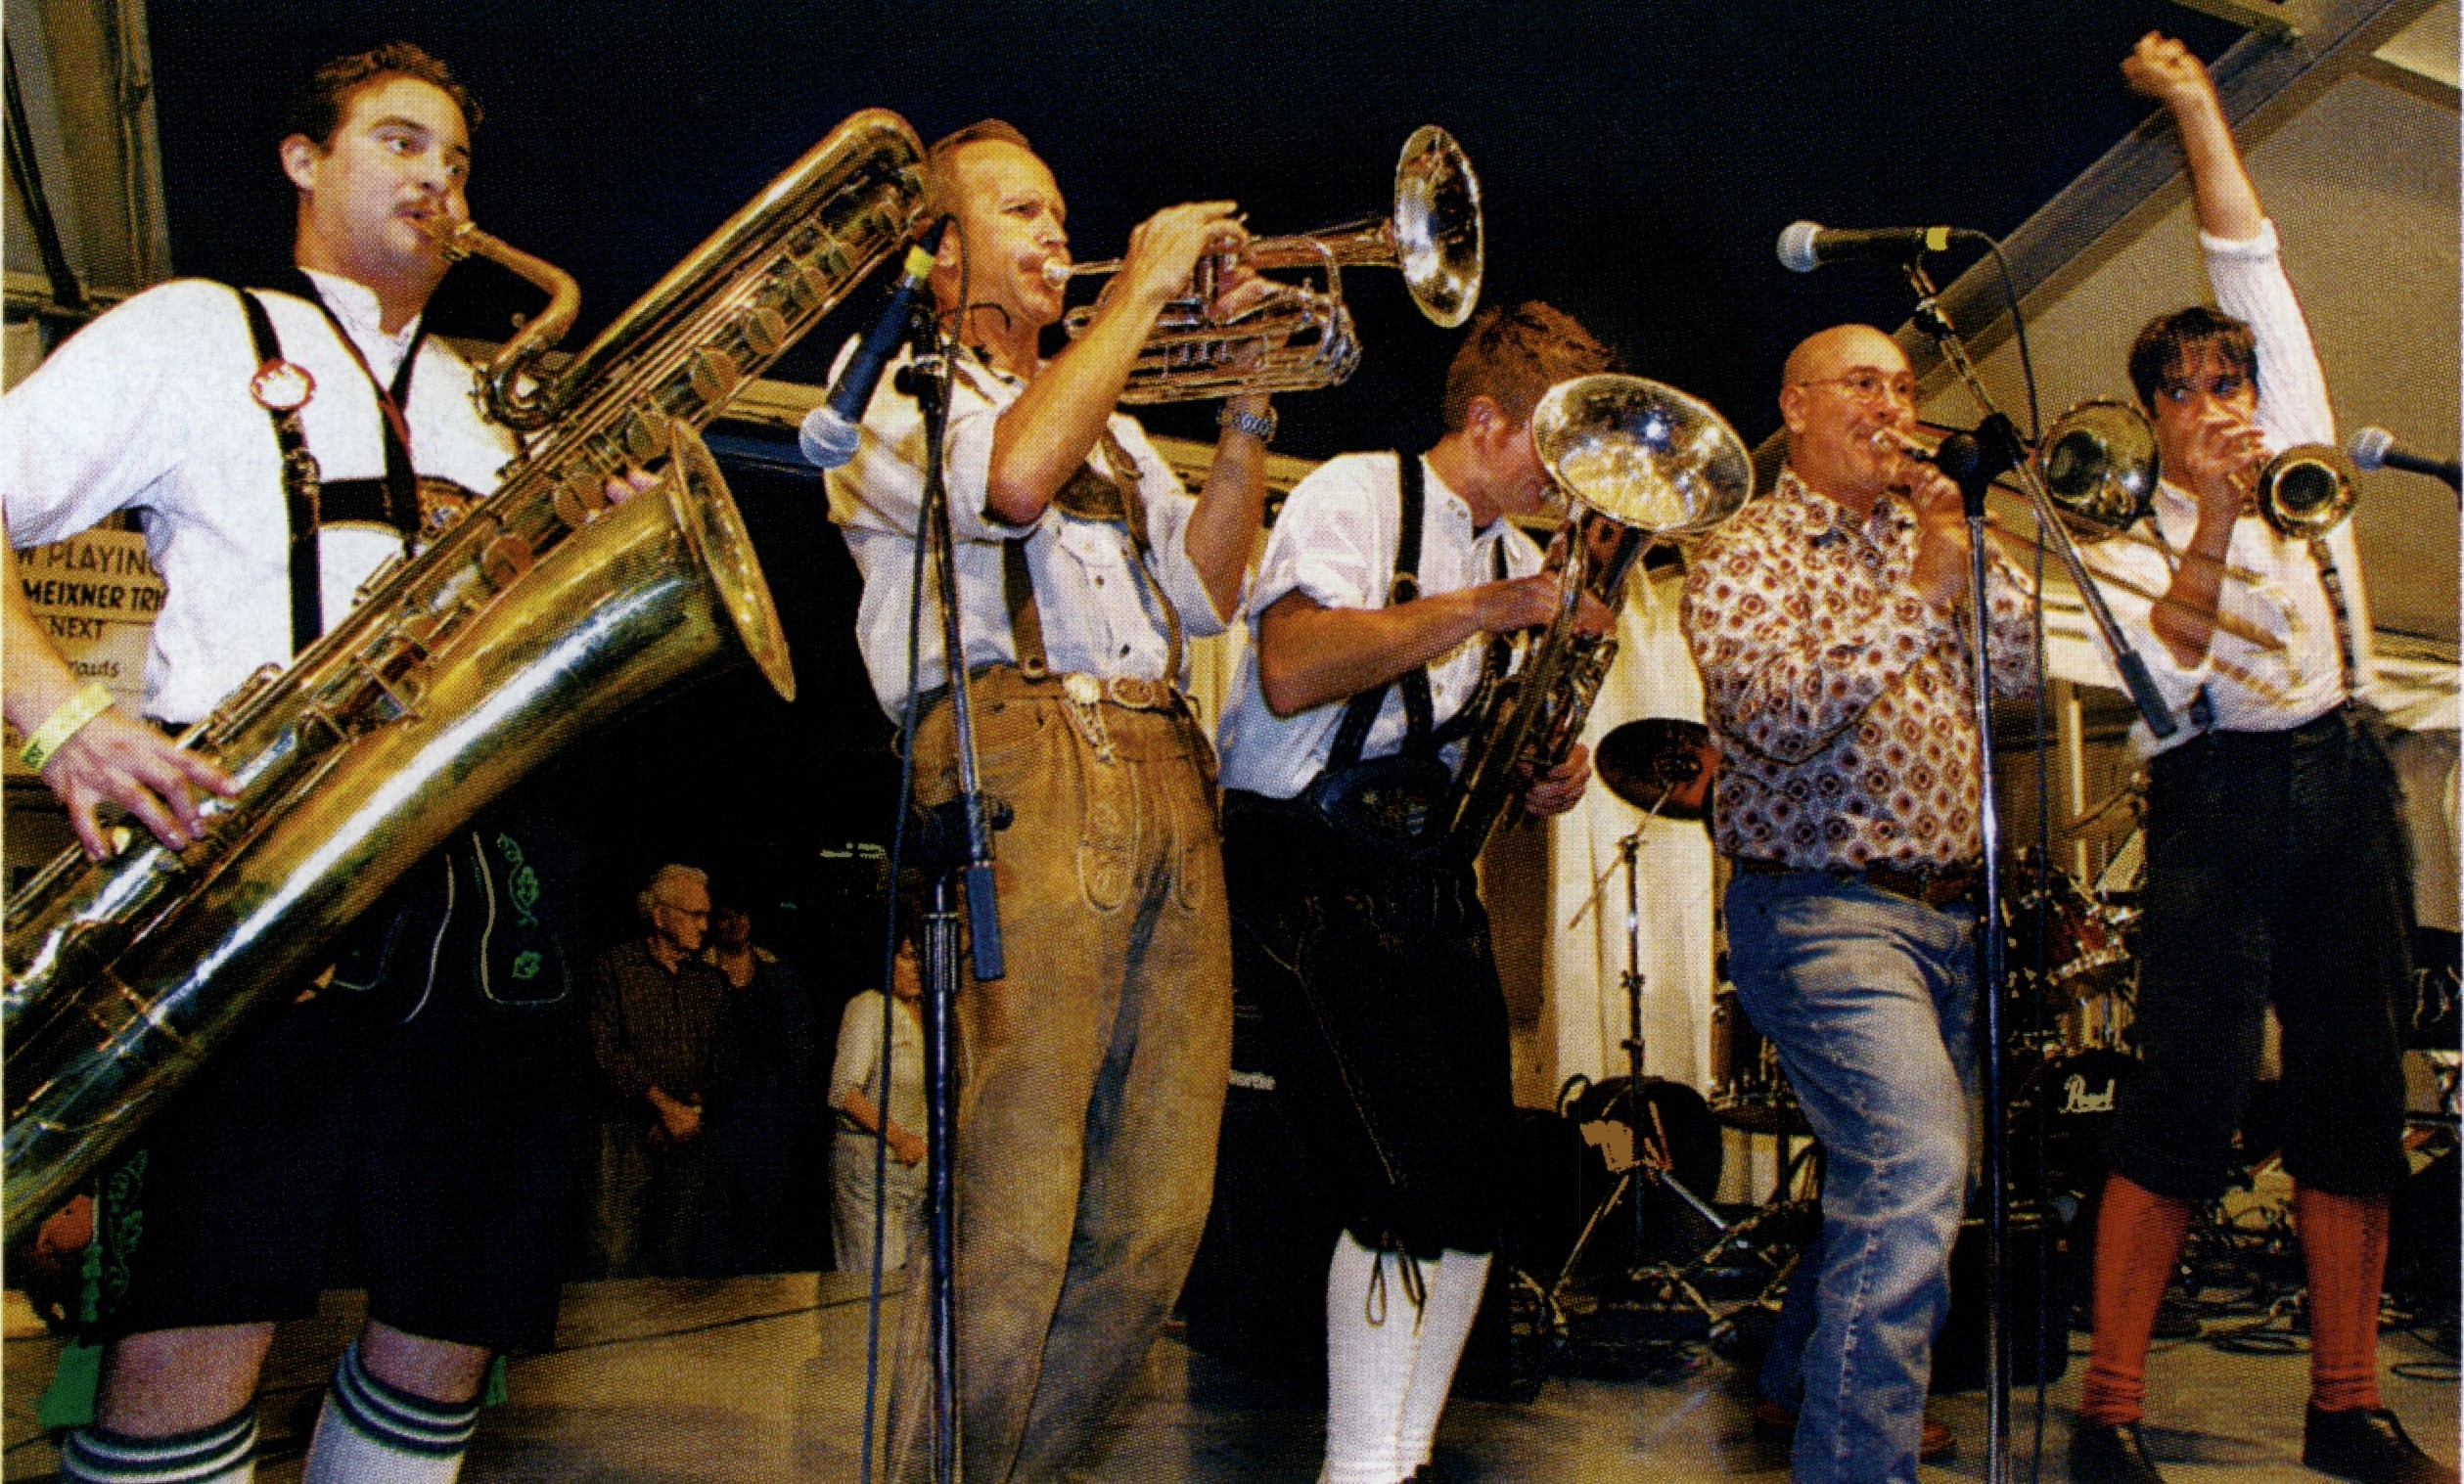 Alex Meixner (far right) and members of Meixner Music often invite local musicians, including Sauerkrauts bandleader Gary Trumet (second from left), to perform with them at Wurstfest. (Photo courtesy of Wurstfest)